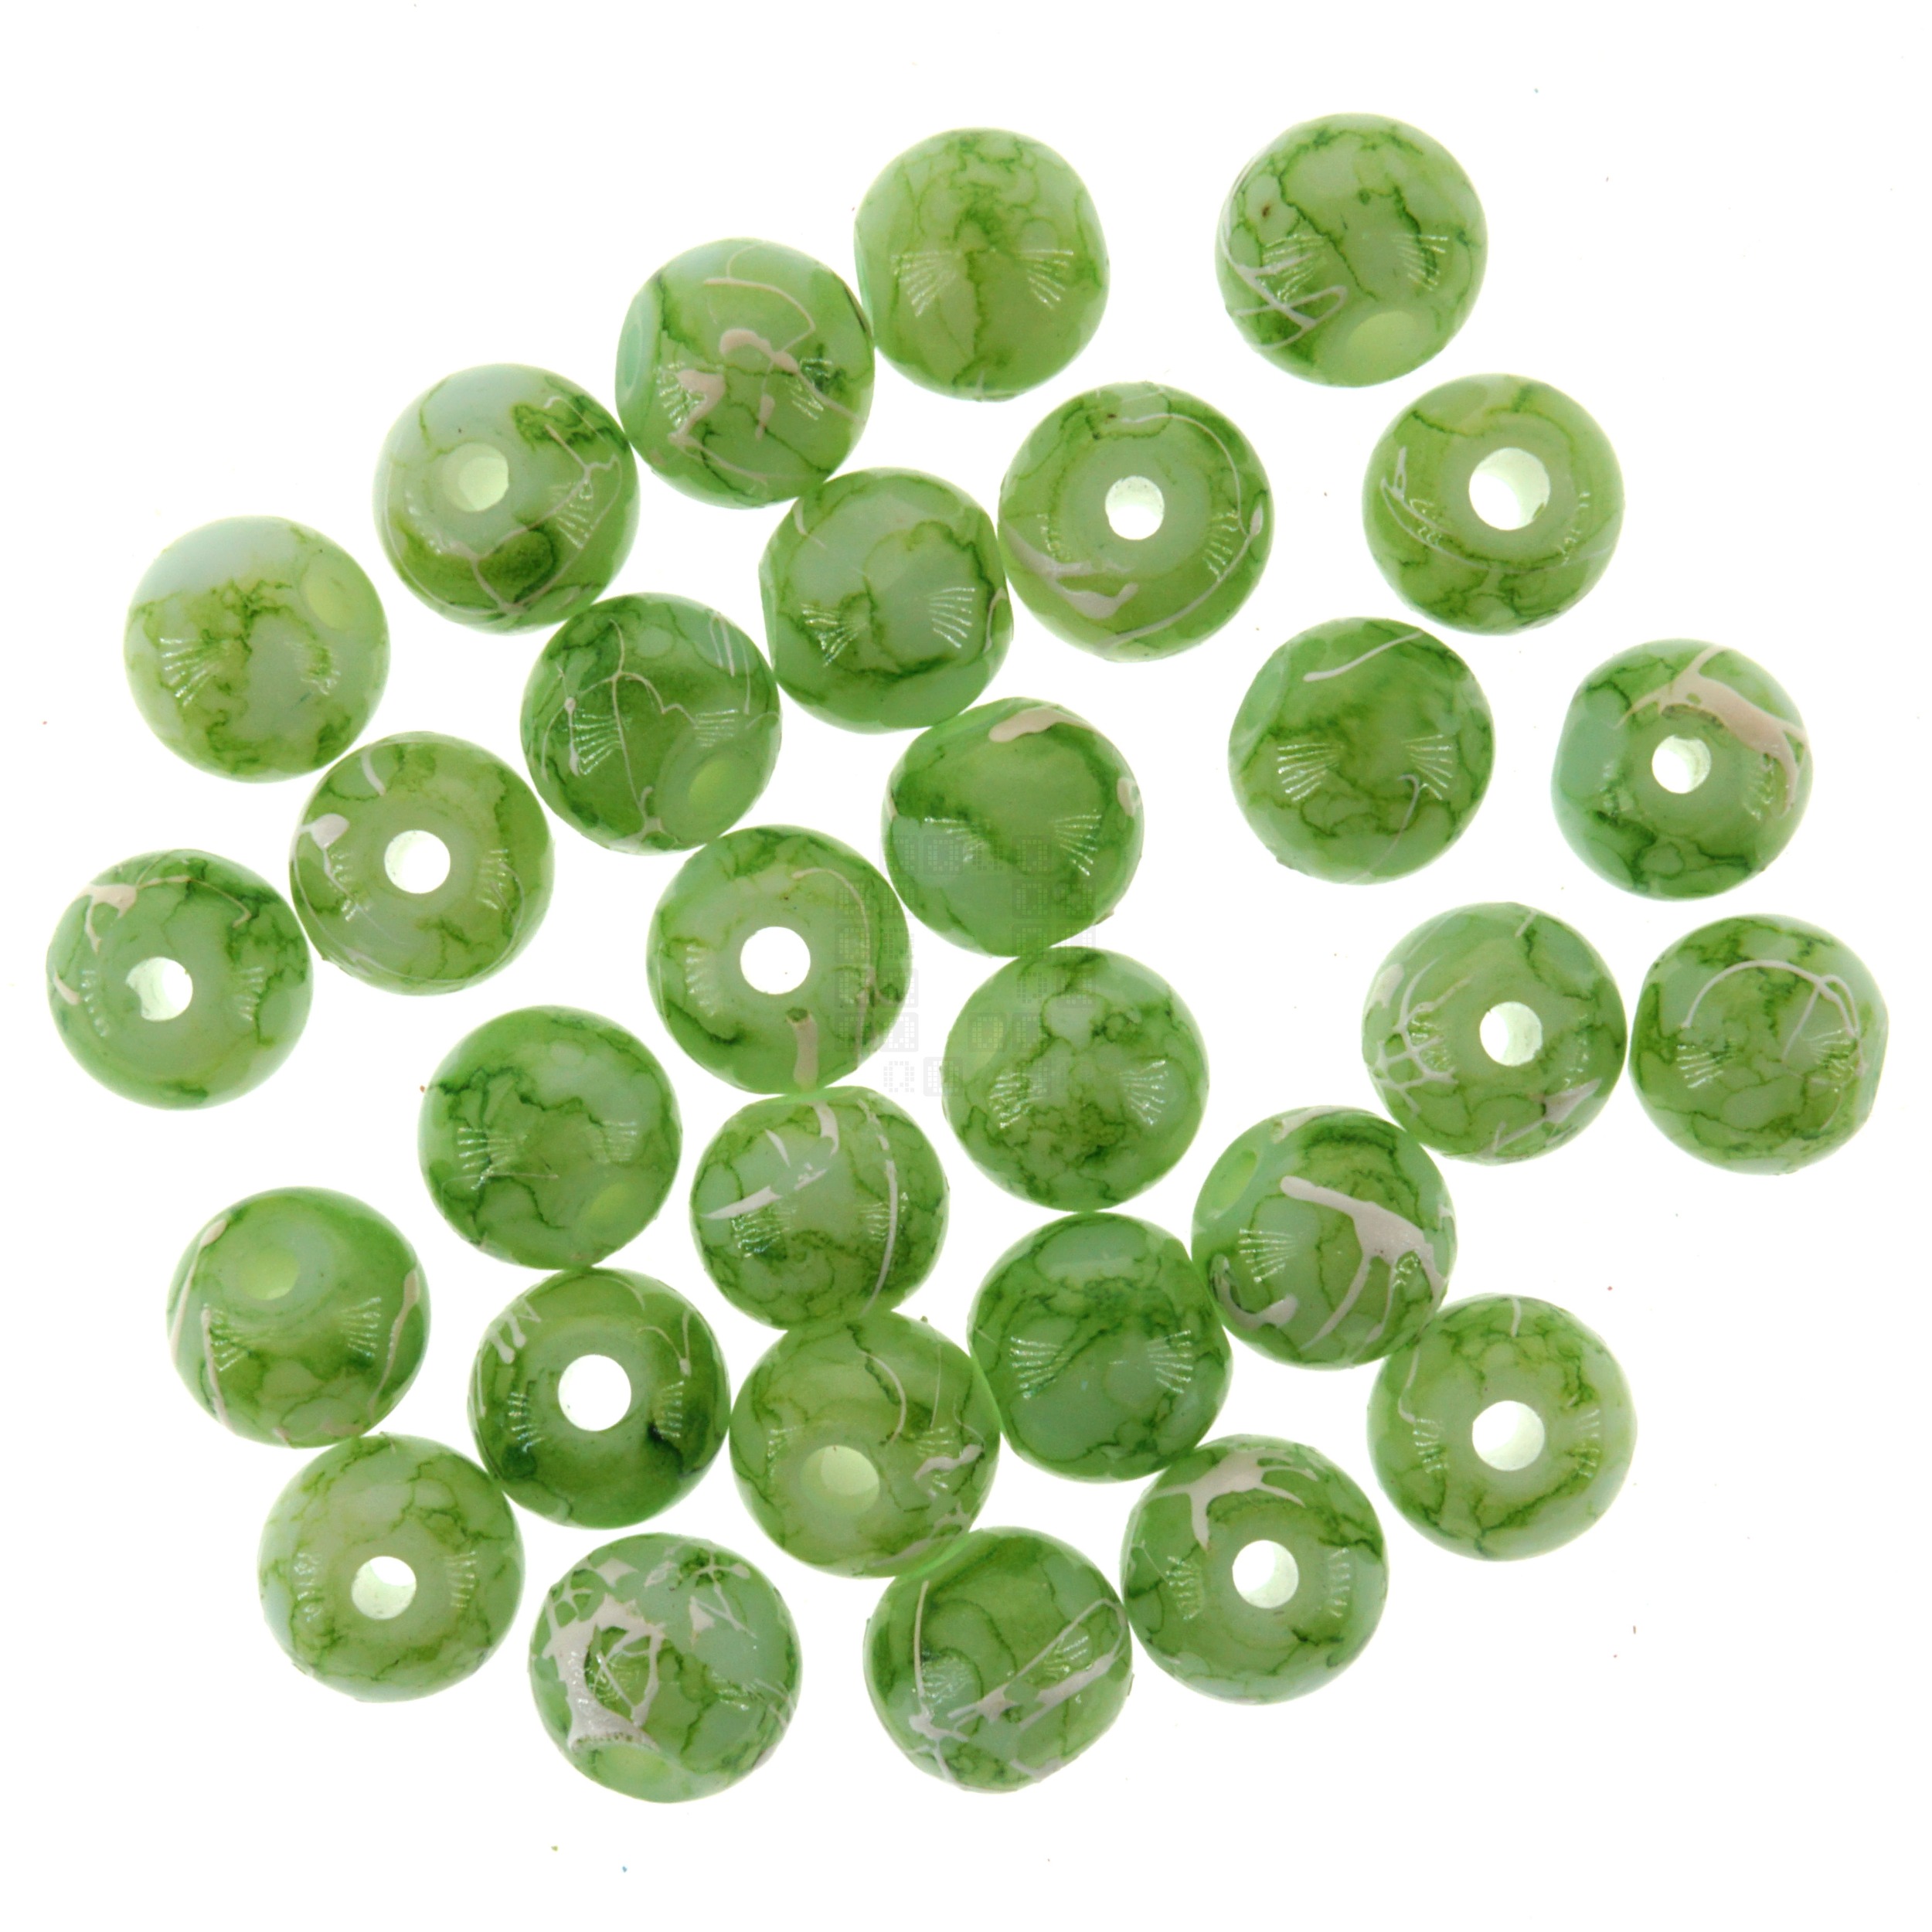 Green Apple 8mm Loose Glass Beads, 30 Pieces